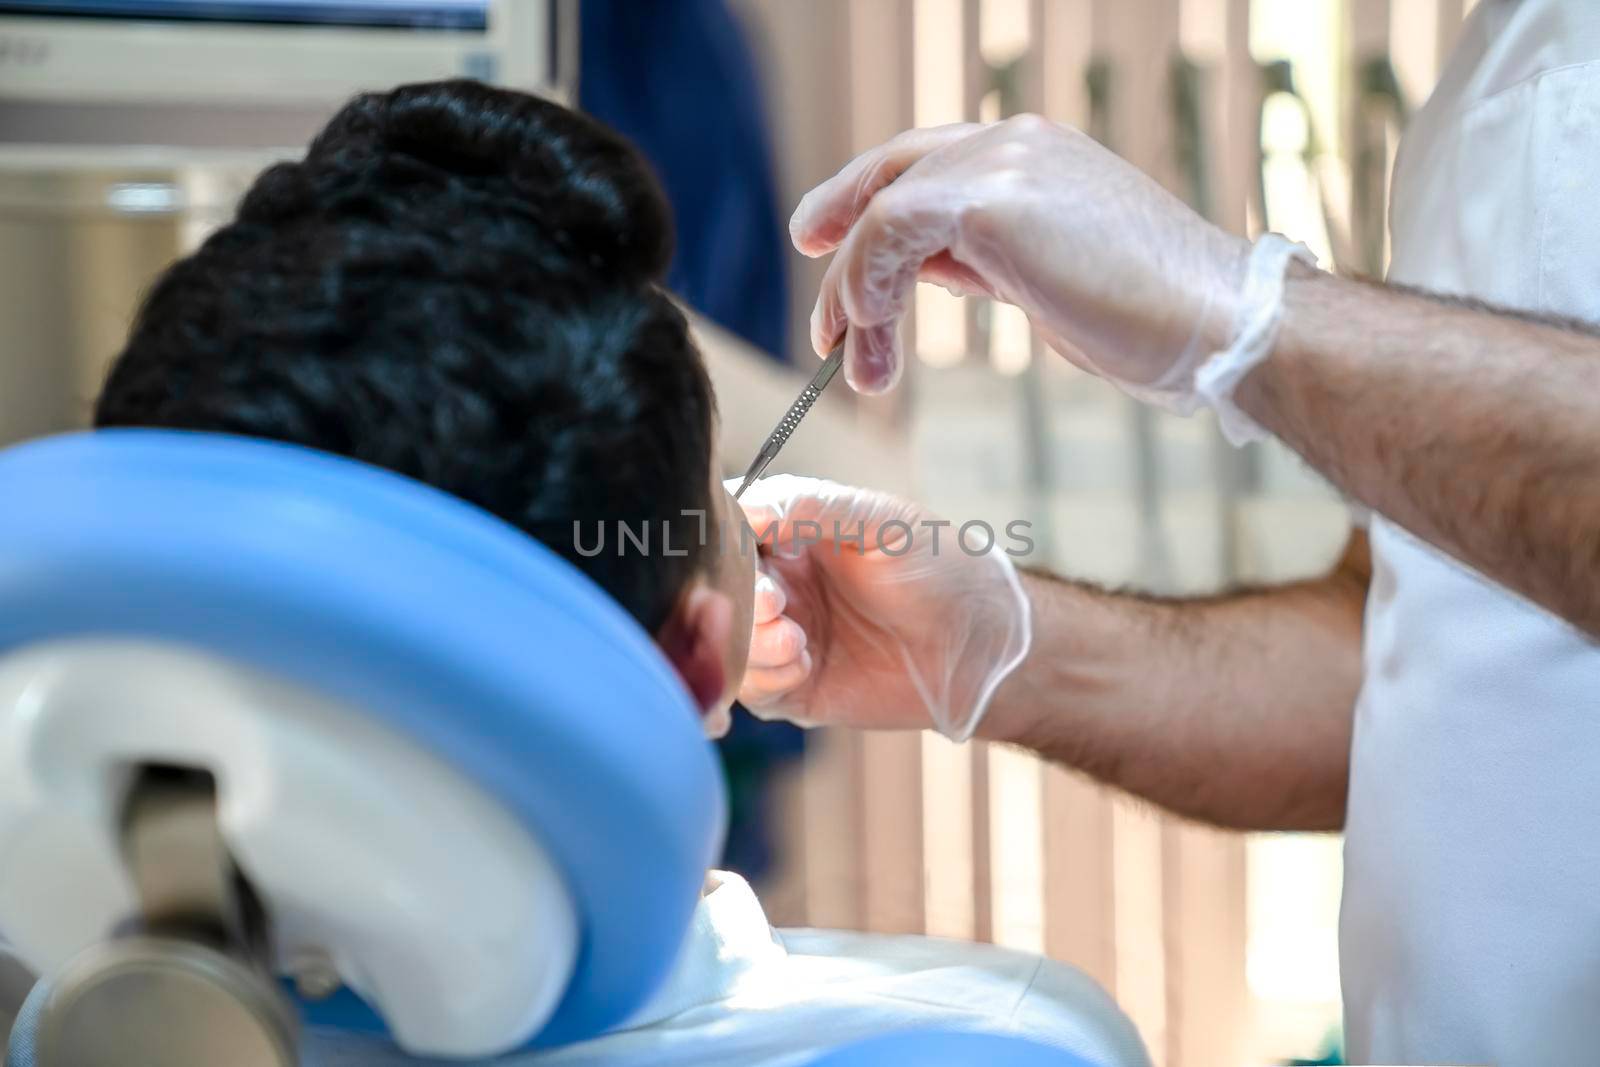 The dentist examines the patient's teeth, close-up.